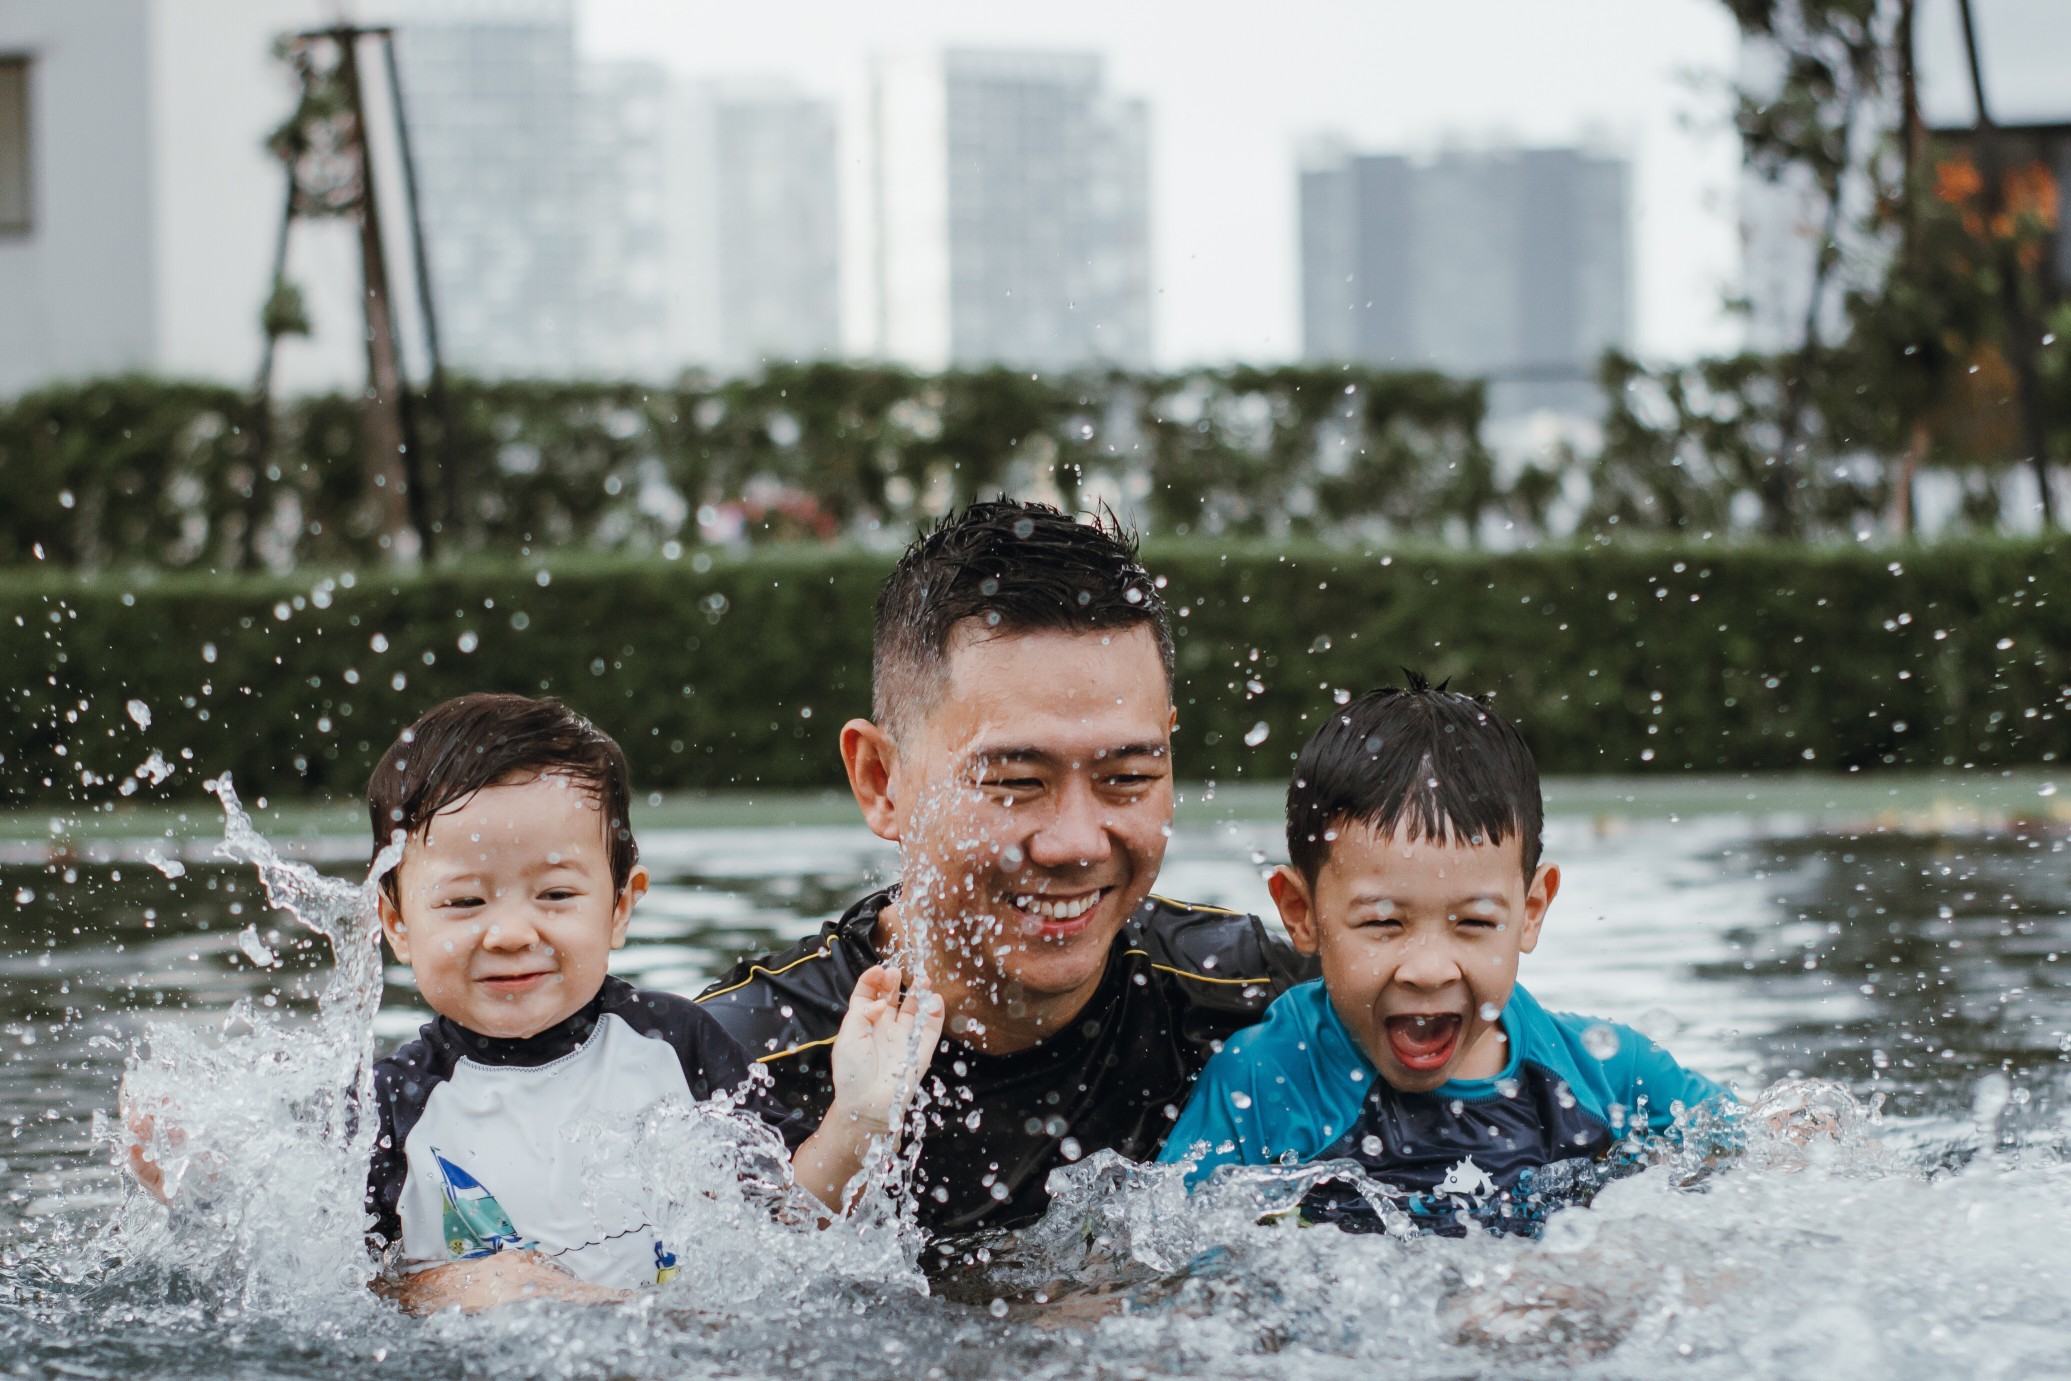 Dad splashing in the pool with his kids